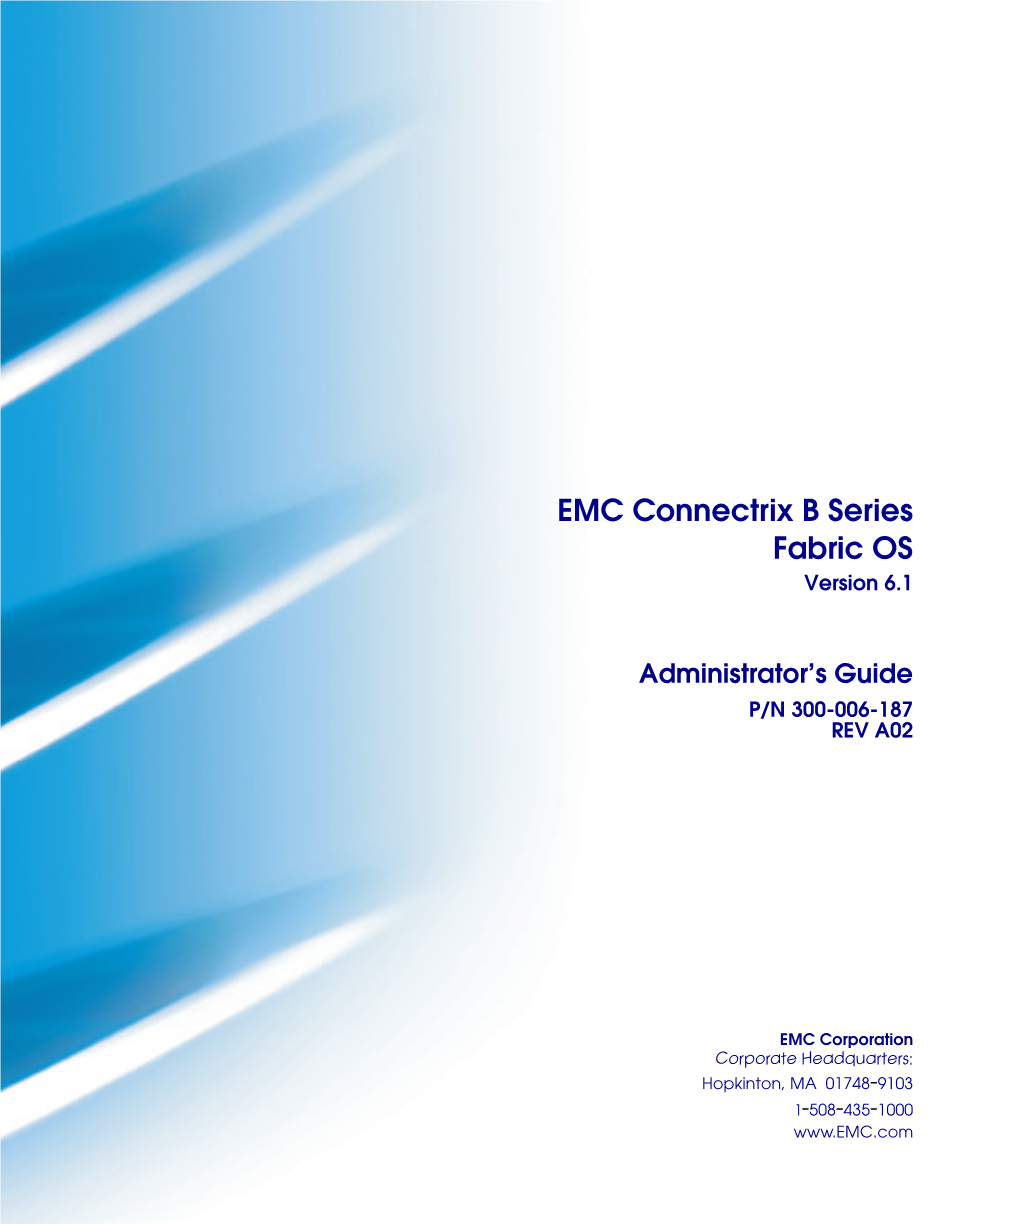 EMC Connectrix B Series Fabric OS Version 6.1 Administrator's Guide